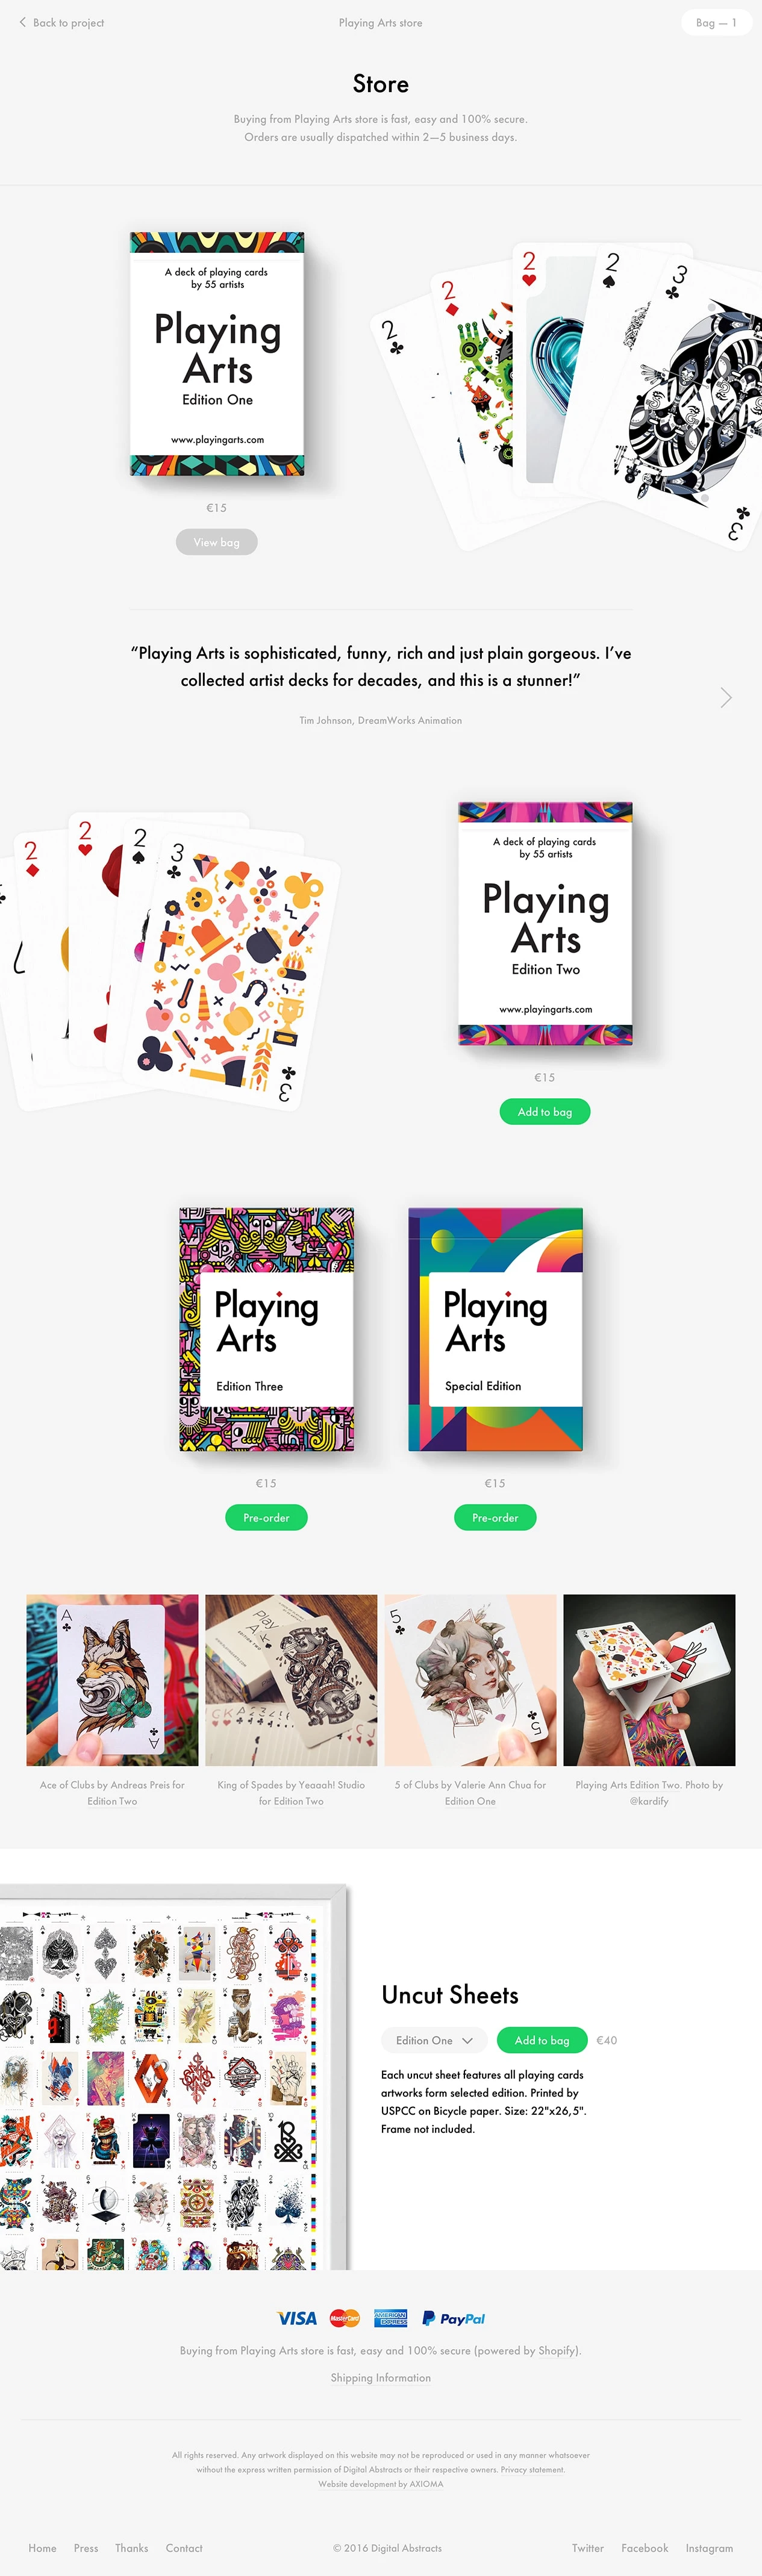 Playing Arts store Landing Page Example: Playing Arts is a collaborative art project that gathers the best designers and illustrators from all over the world with an idea to express their vision of an ordinary playing card using personal styles, techniques and imagination.